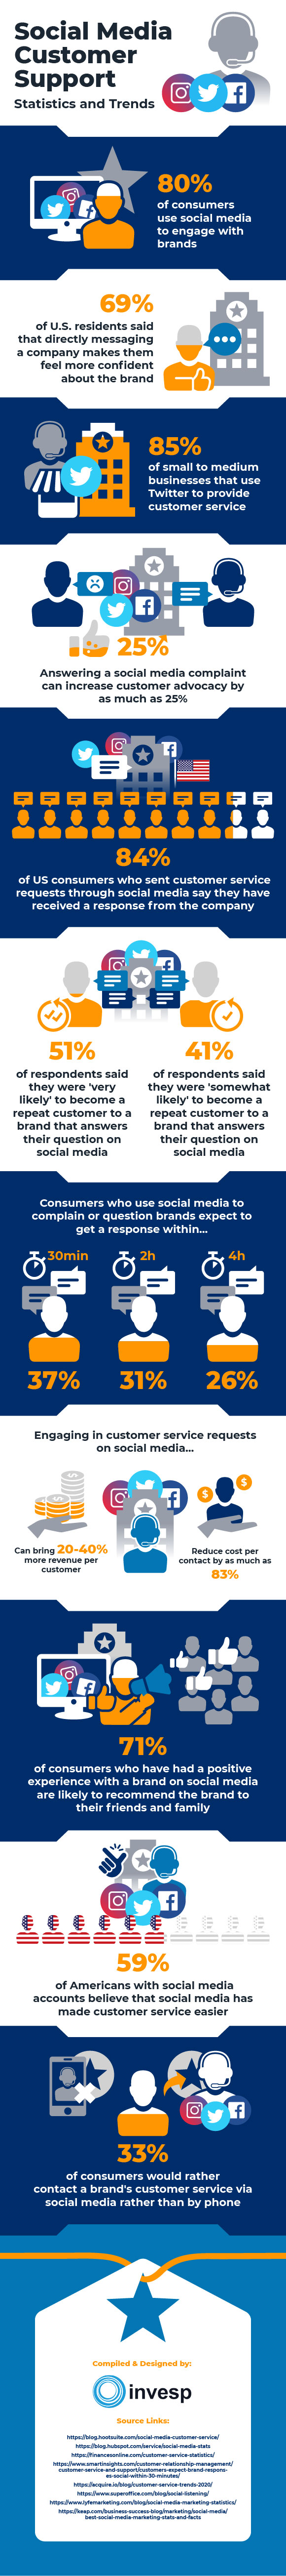 The State of Social media customer support– Statistics and Trends